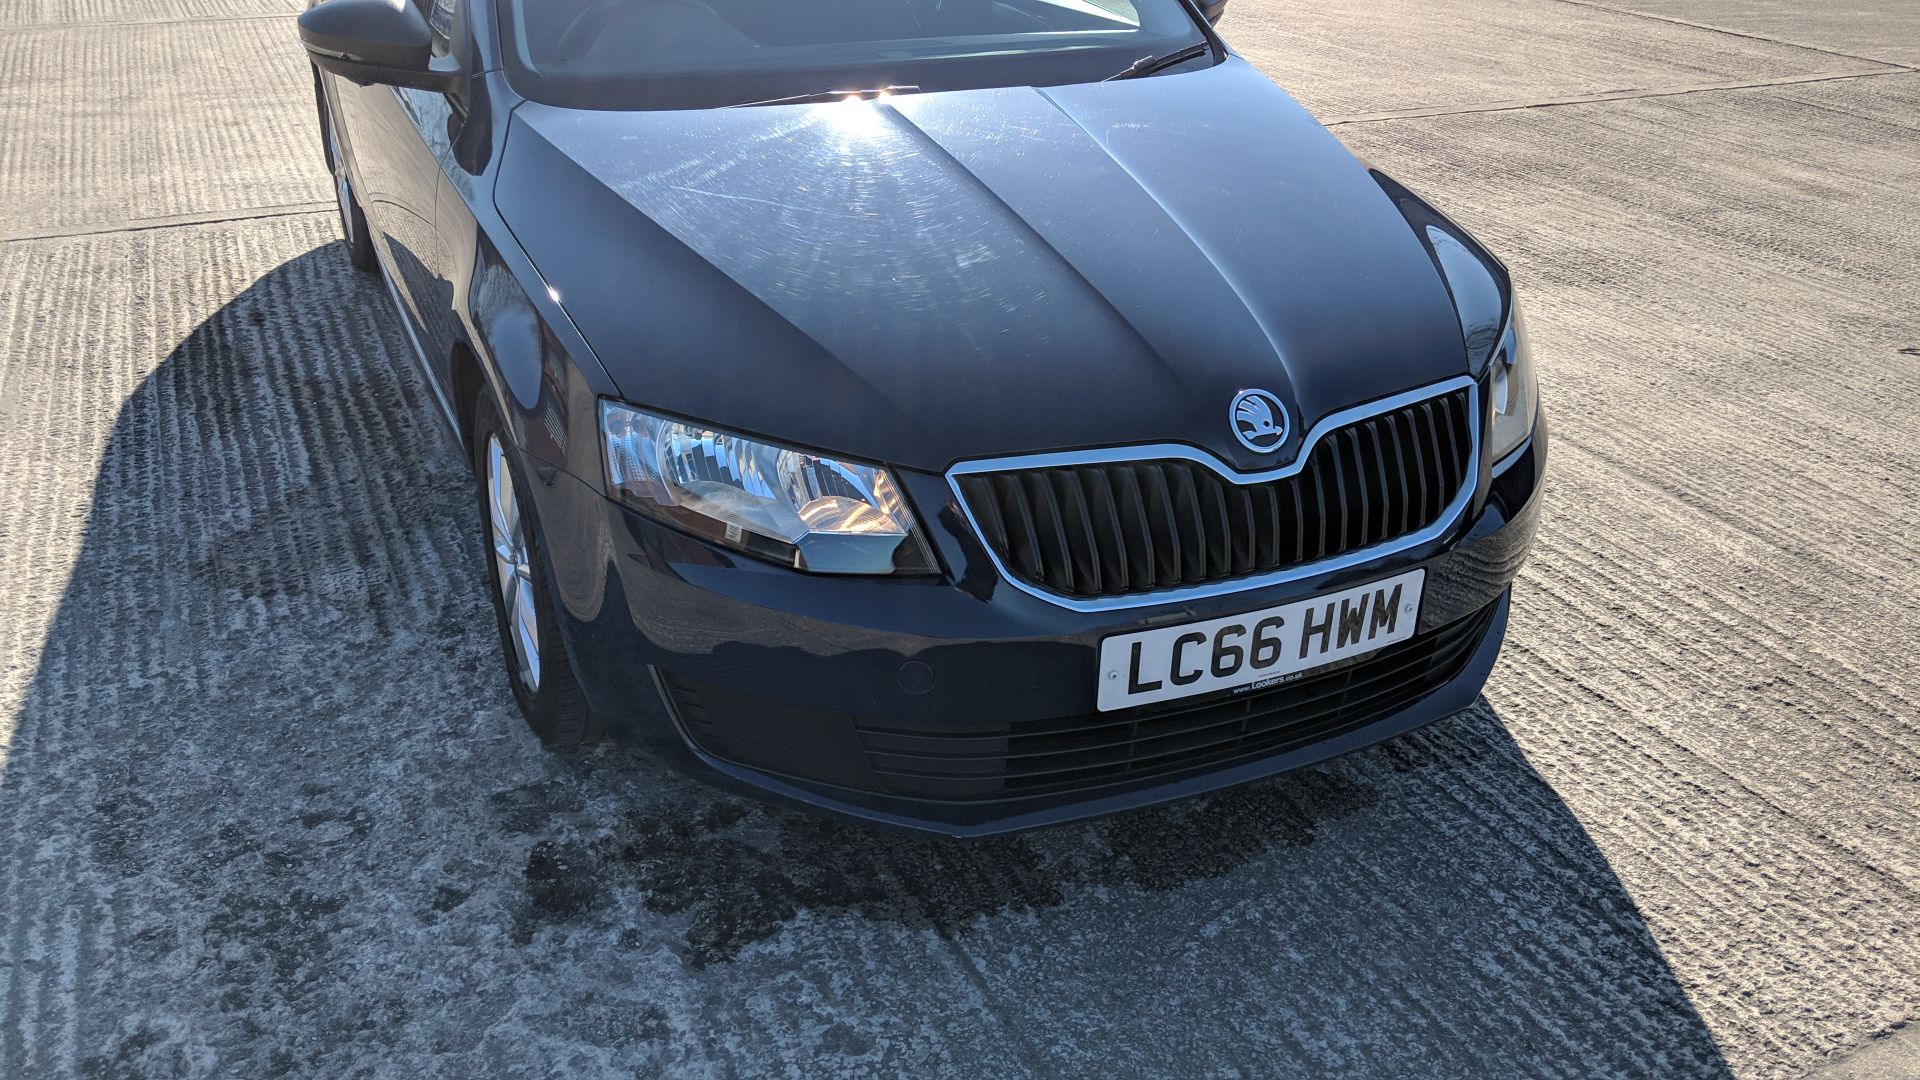 LC66 HWM Skoda Octavia S TDI S-A 1598cc diesel engine. Colour: Blue. First registered: 06.02.17. - Image 40 of 58